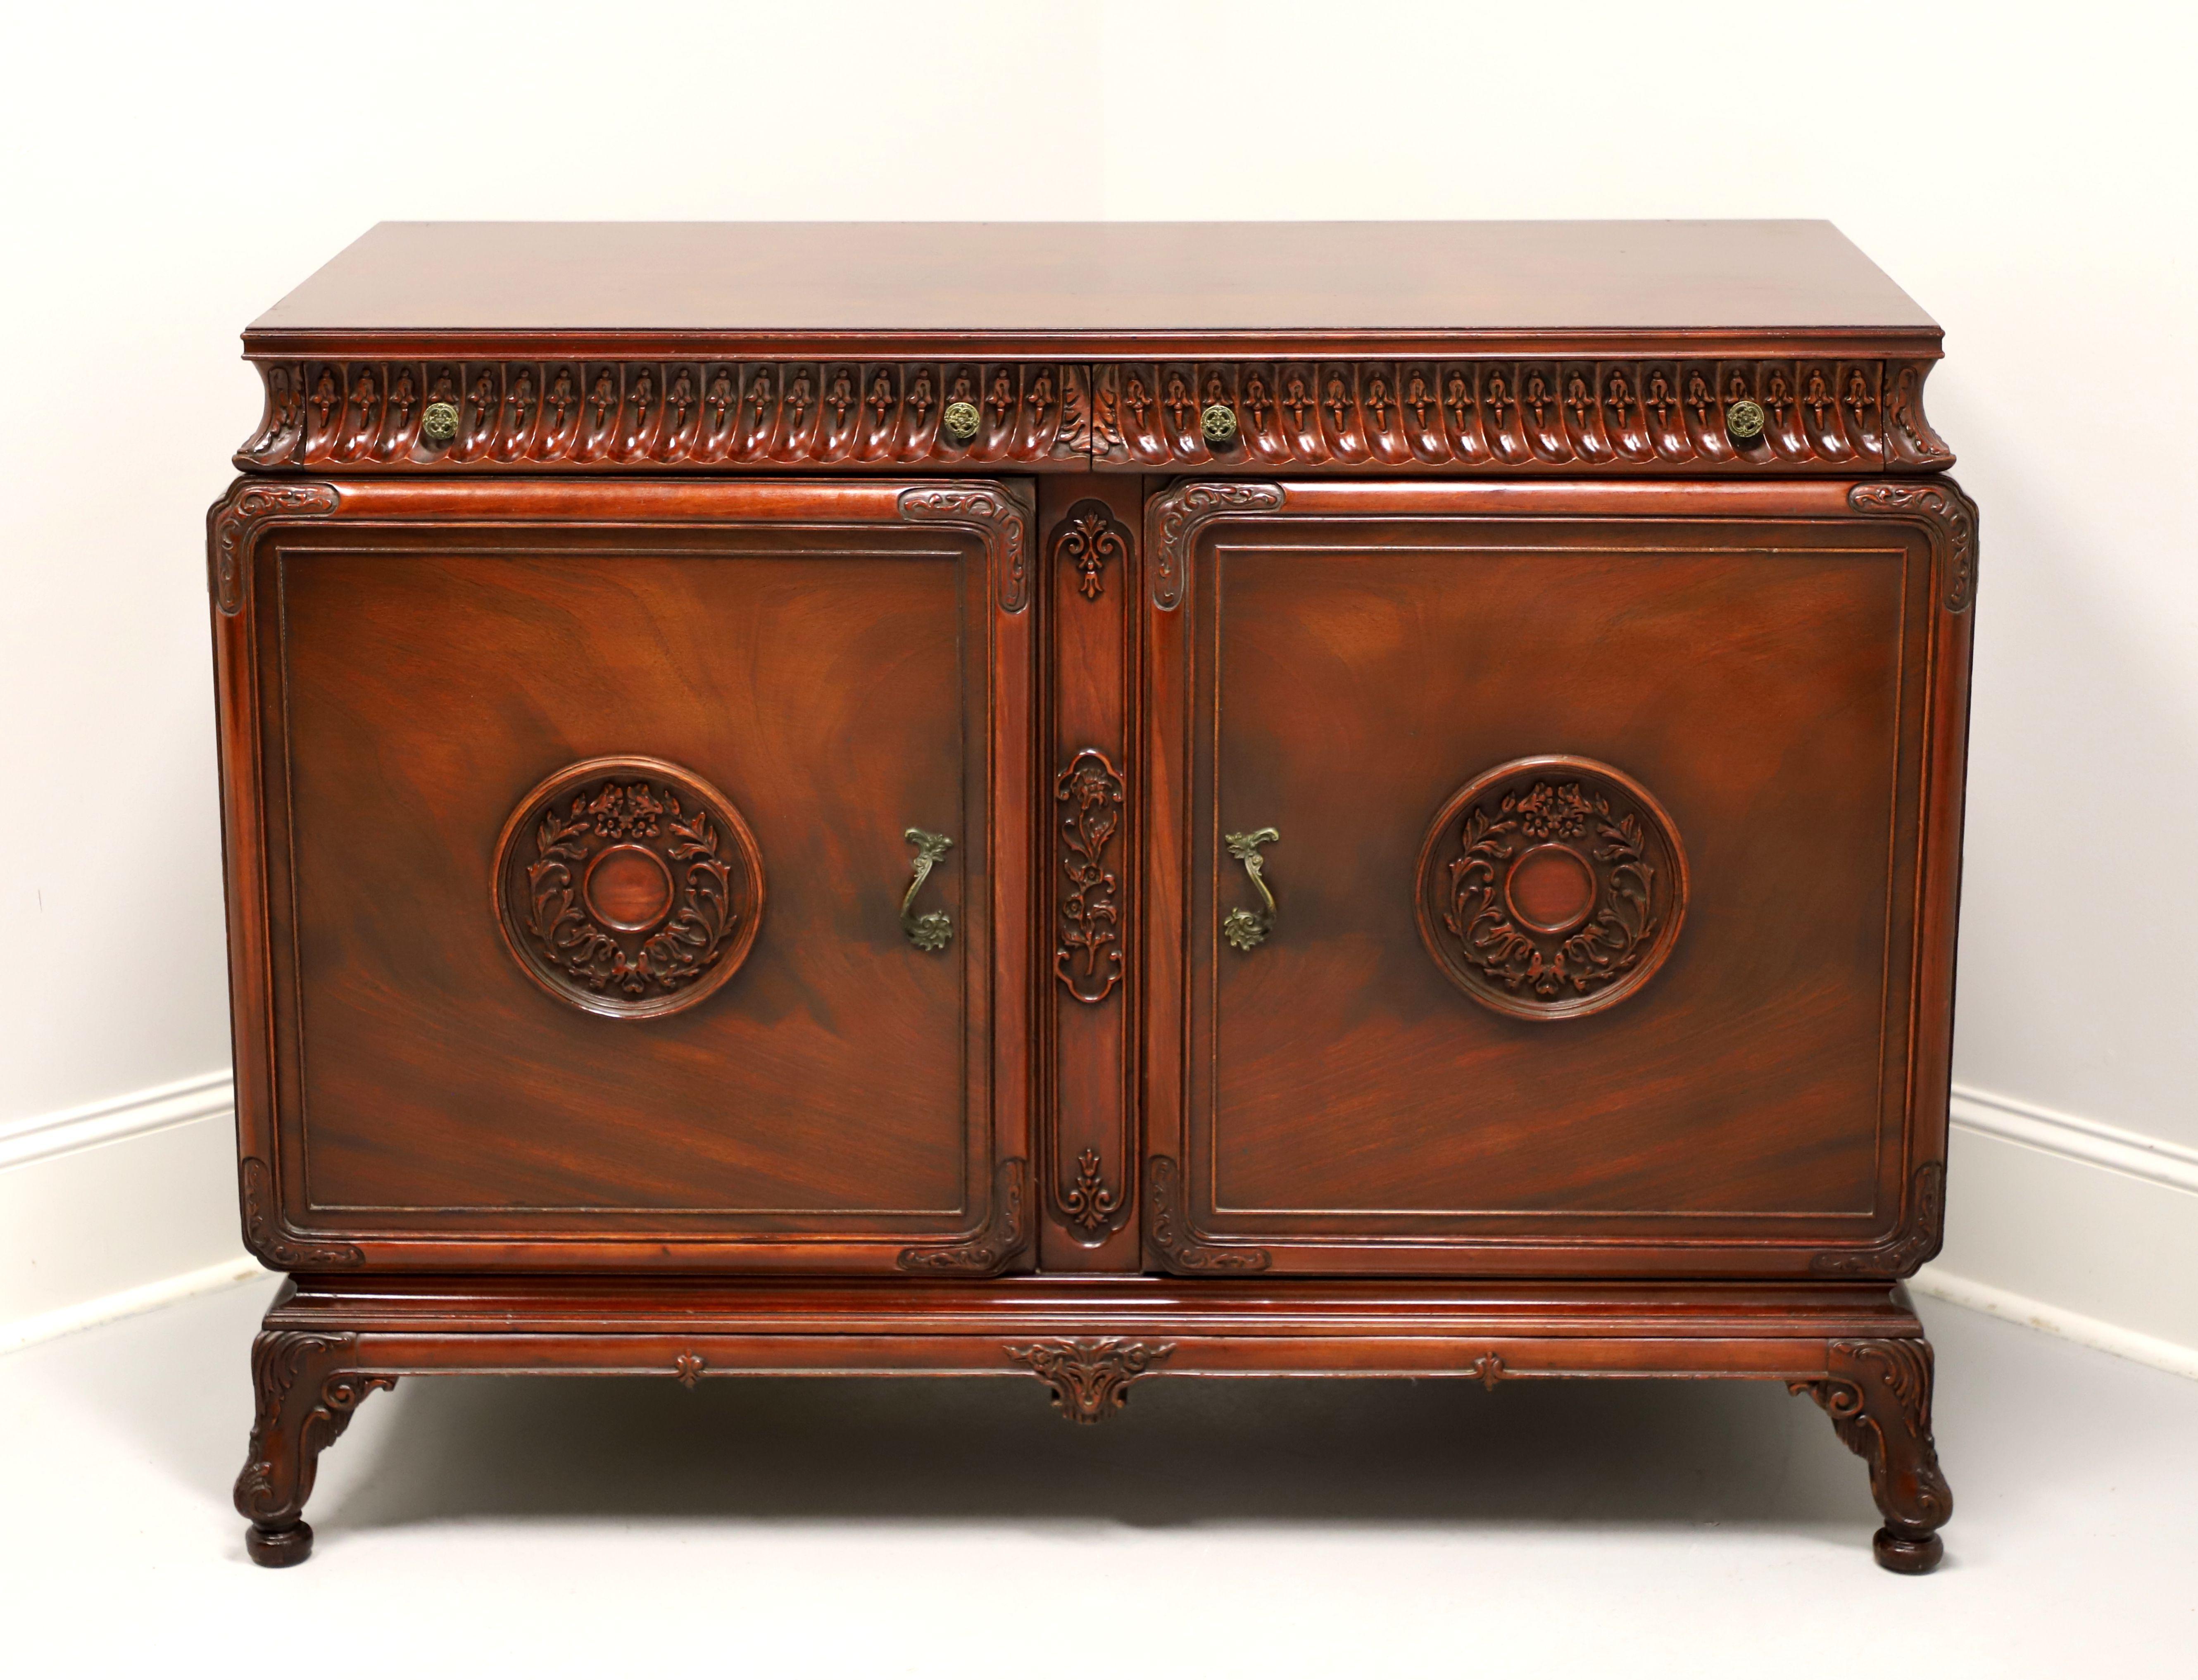 An Asian influenced double dresser, unbranded, similar quality to Kindel or Rway. Mahogany with flame mahogany door fronts & top, ogee edge to top, decorative brass hardware, distinctive Asian styling, intricately carved top drawers & sides under